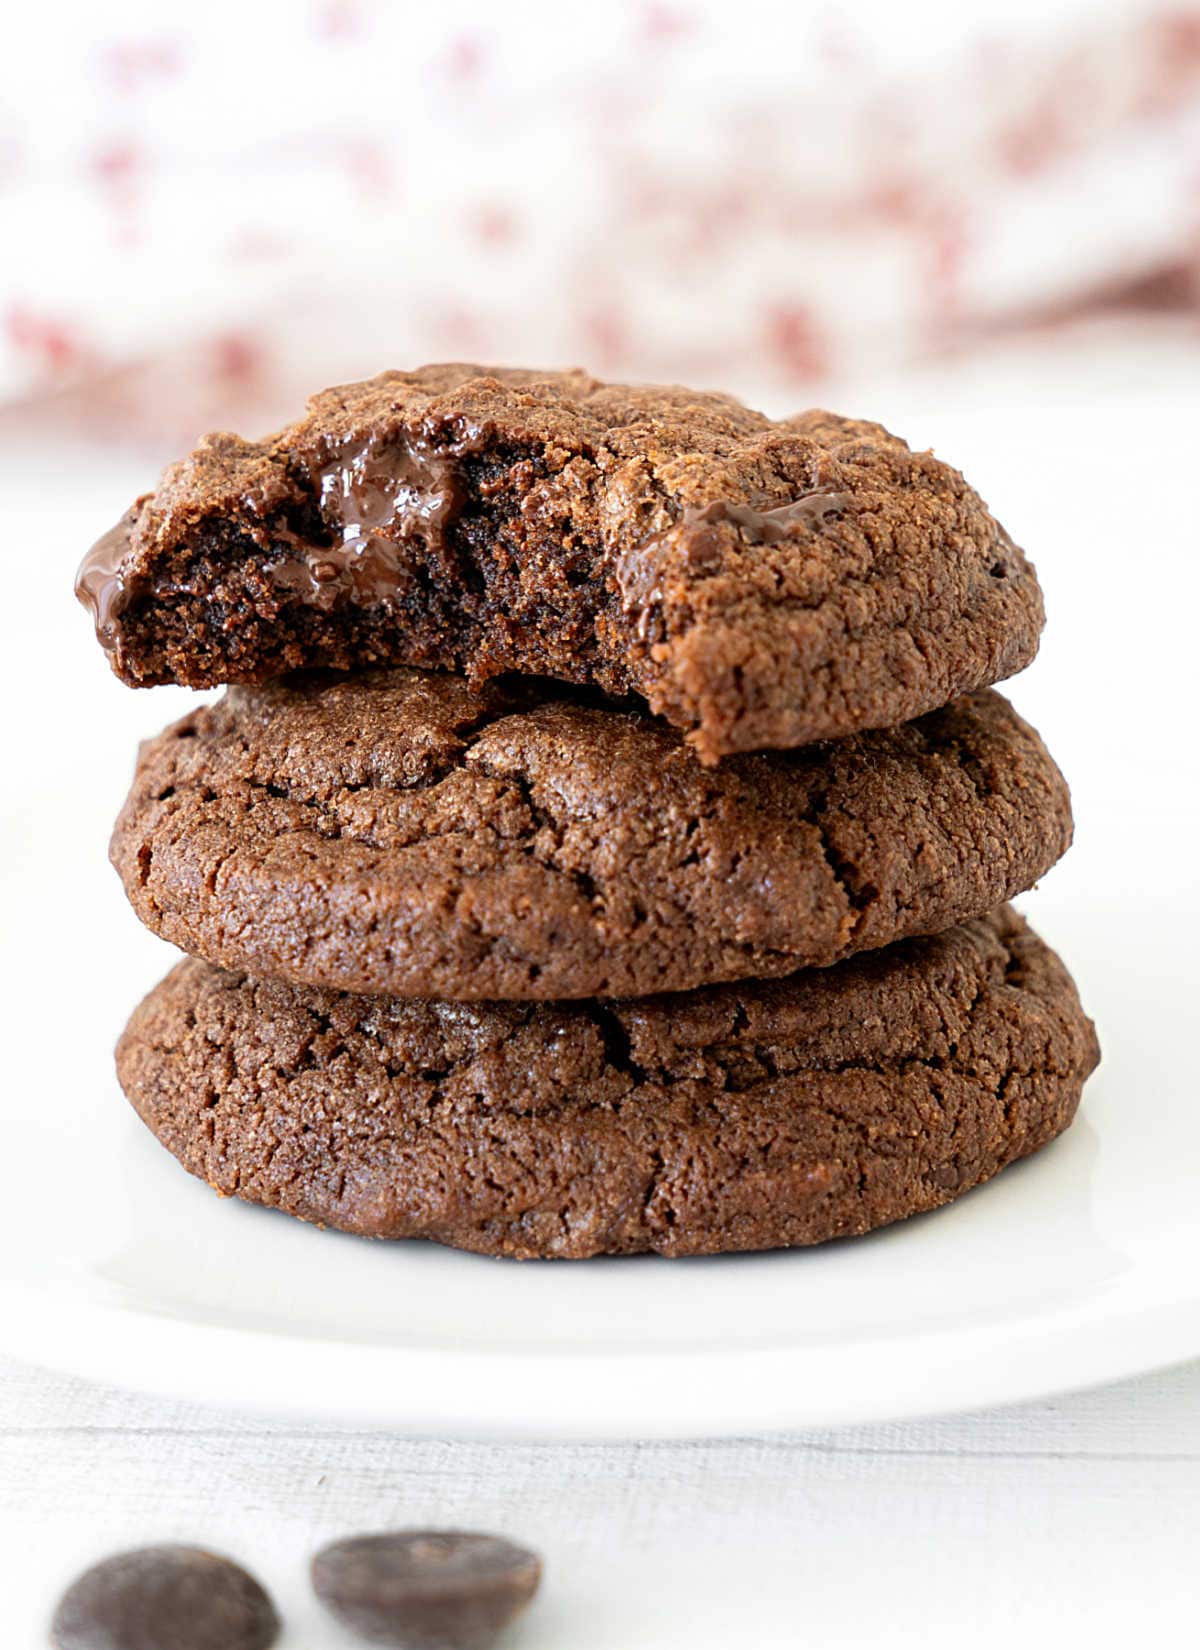 Stack of three chocolate cookies on a white plate. Top one is bitten. 